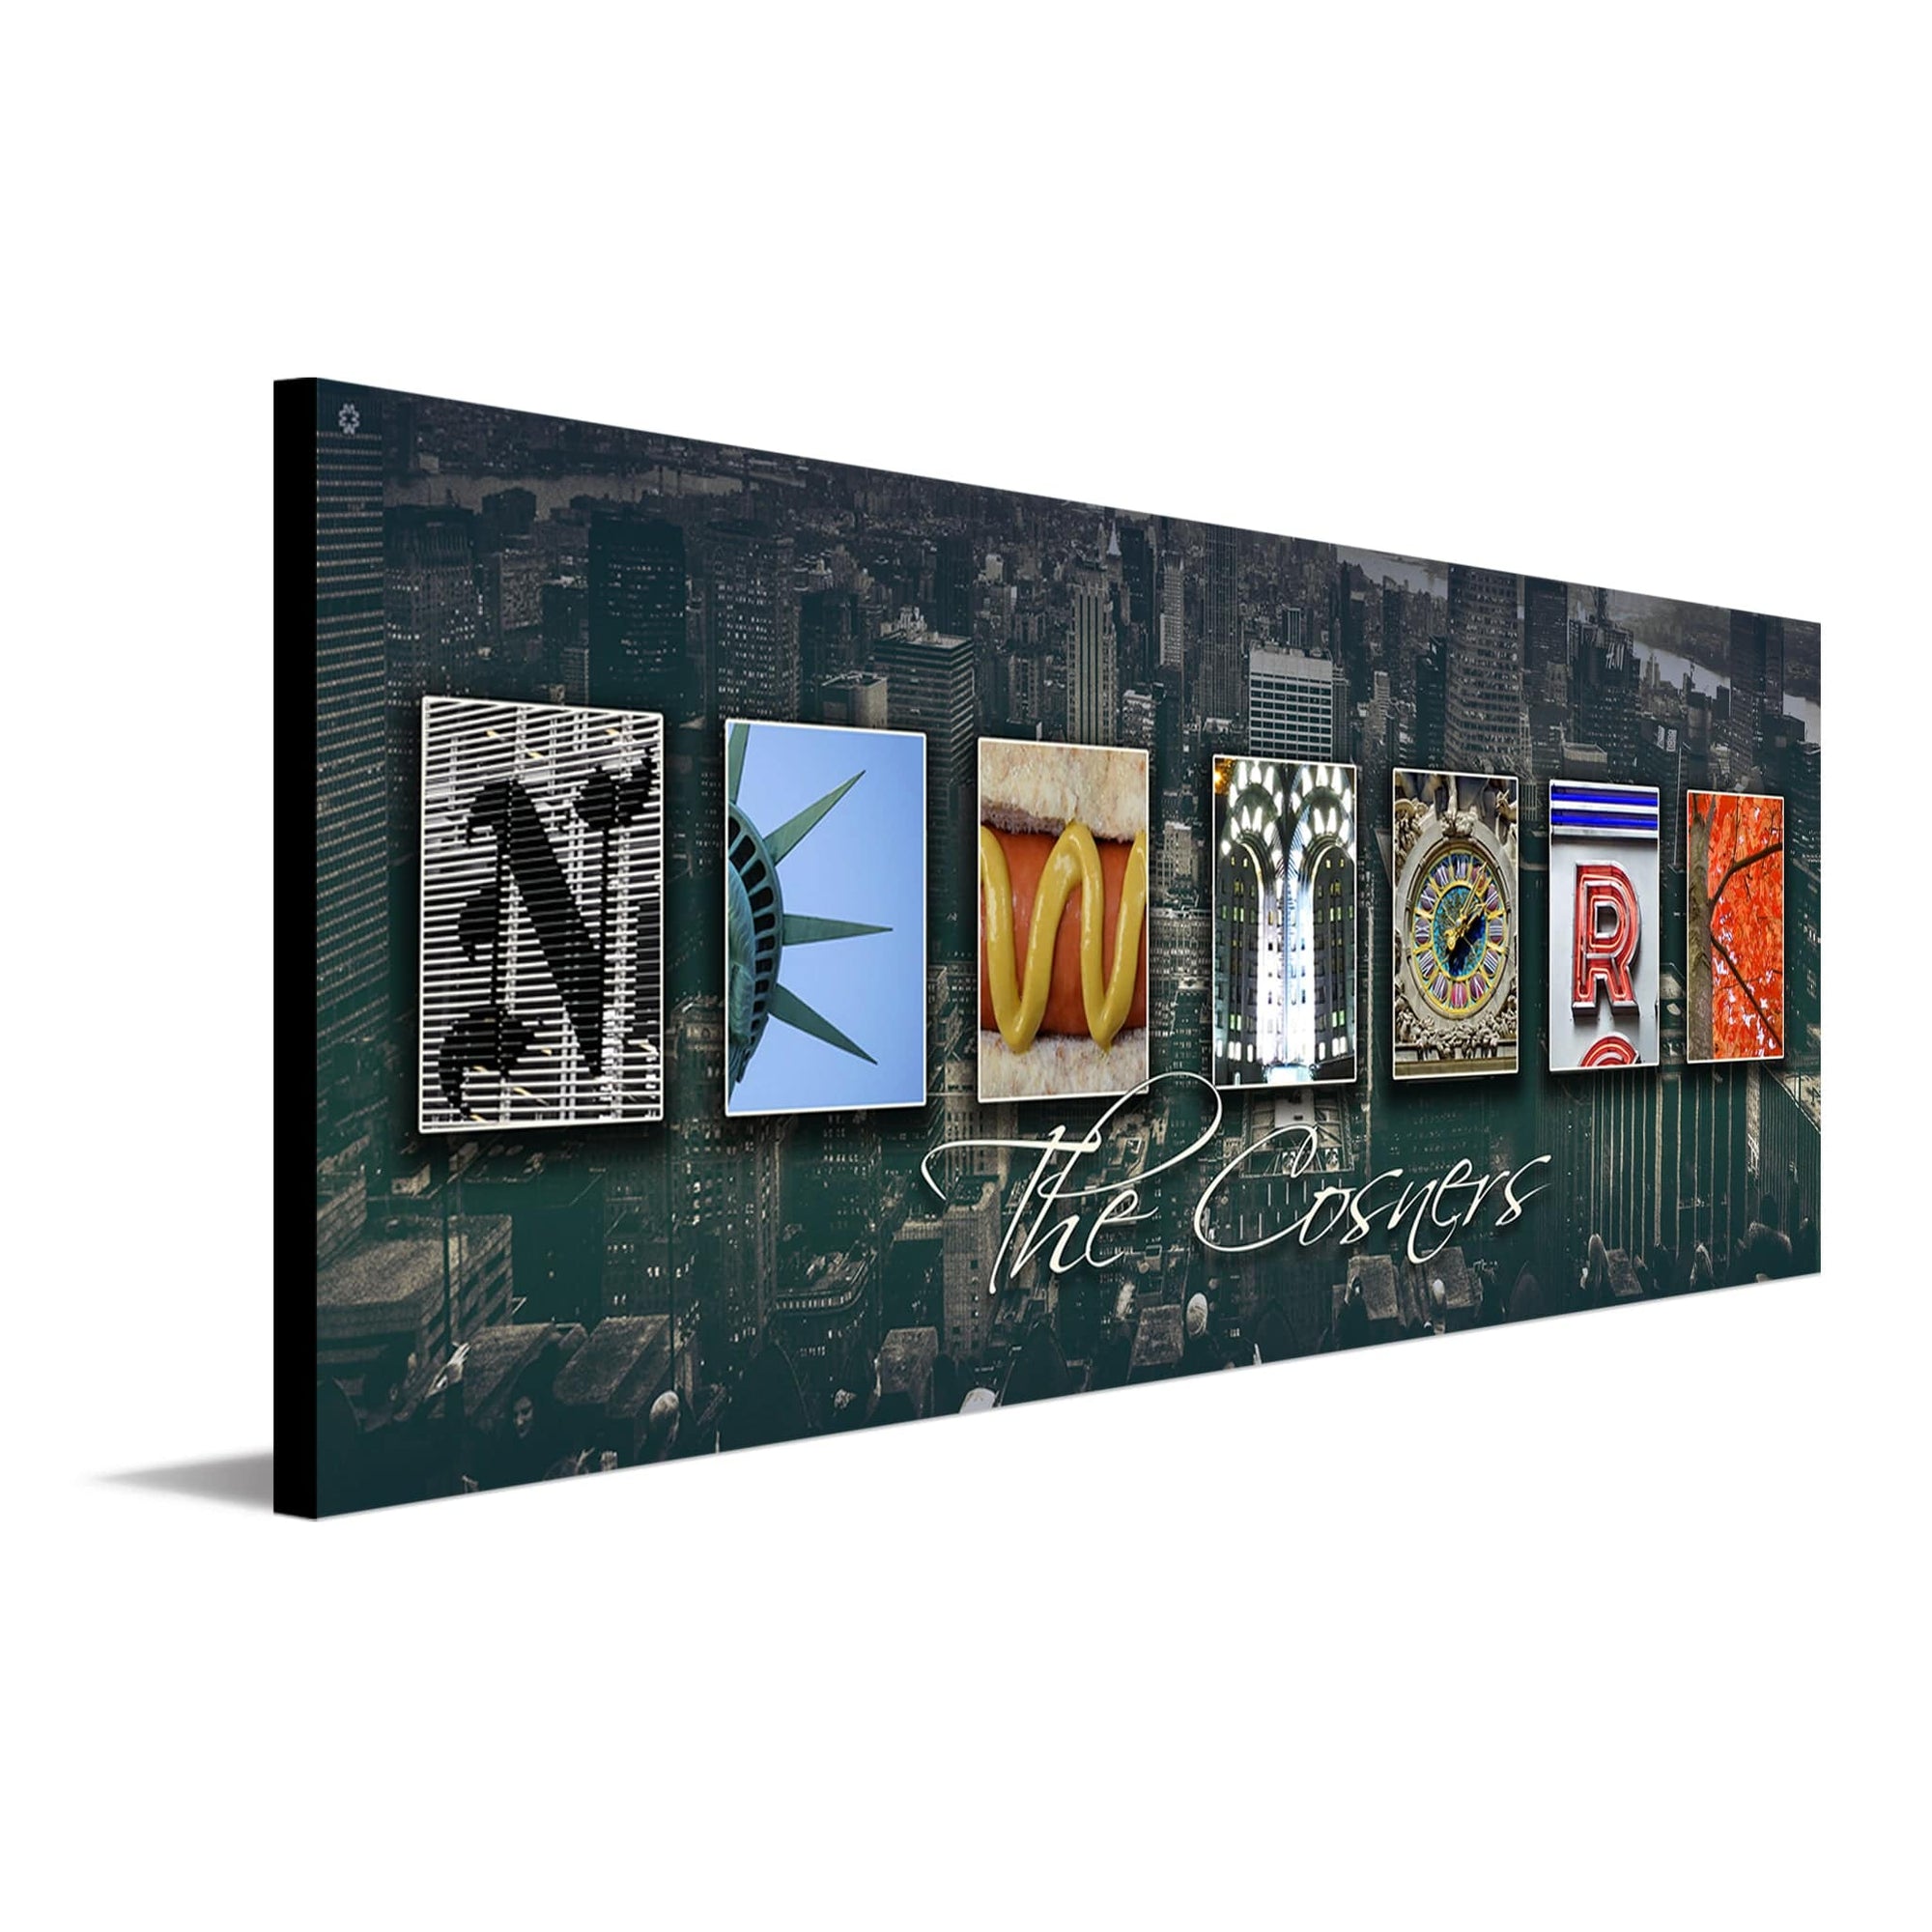 Personalized wall art of New York using photographs to spell the words New York - Personal-Prints